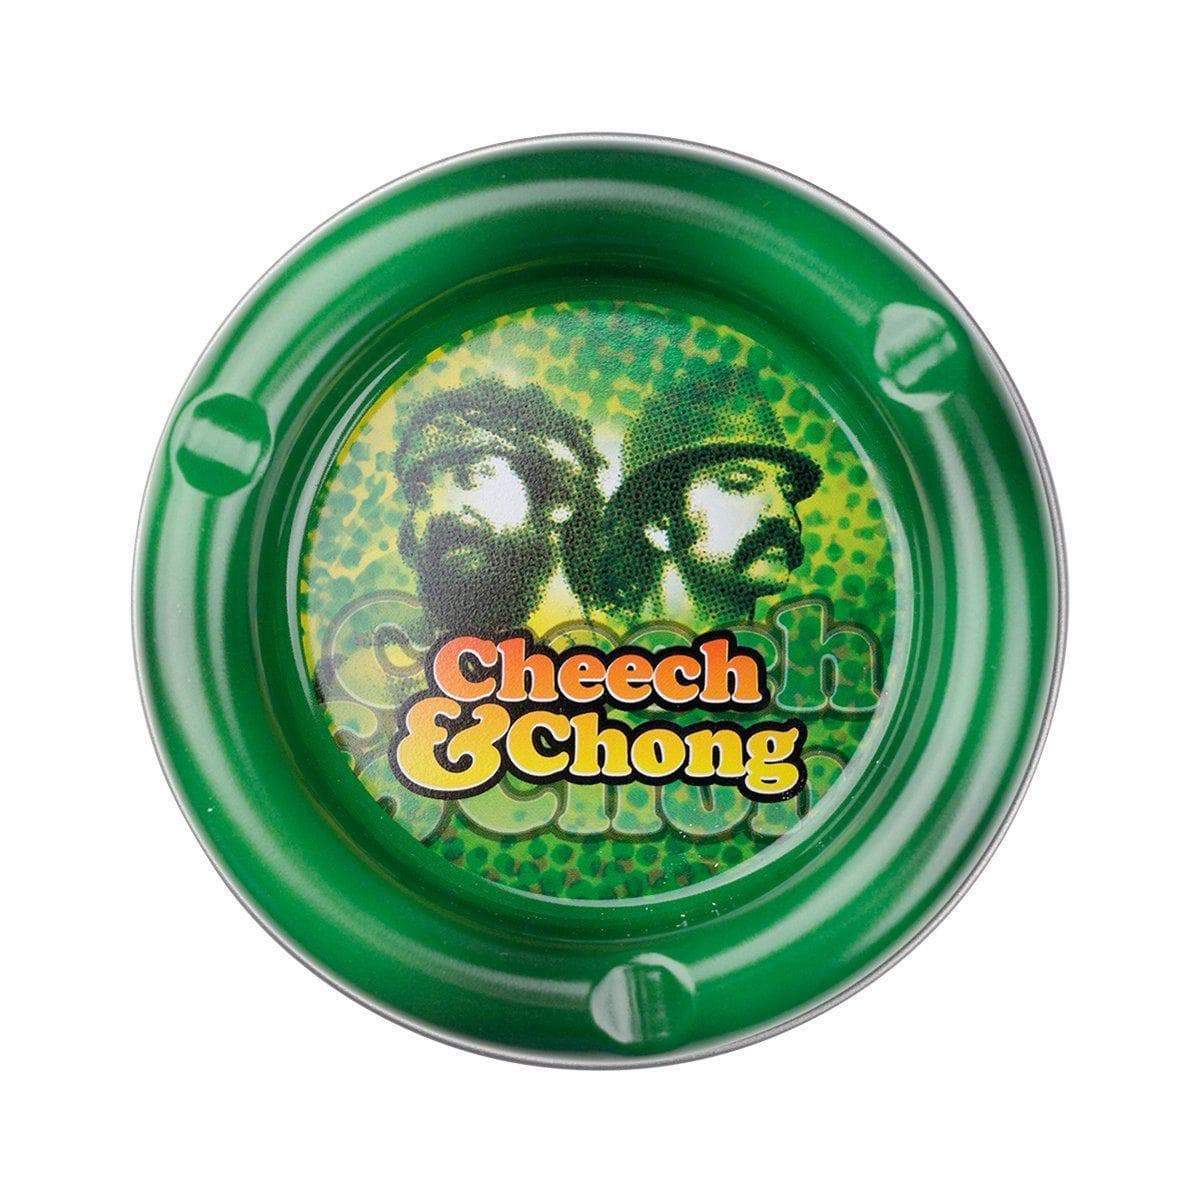 Multipurpose round stash tray plate smoking accessory in different colors with fun comedy duo Cheech n Chong designs